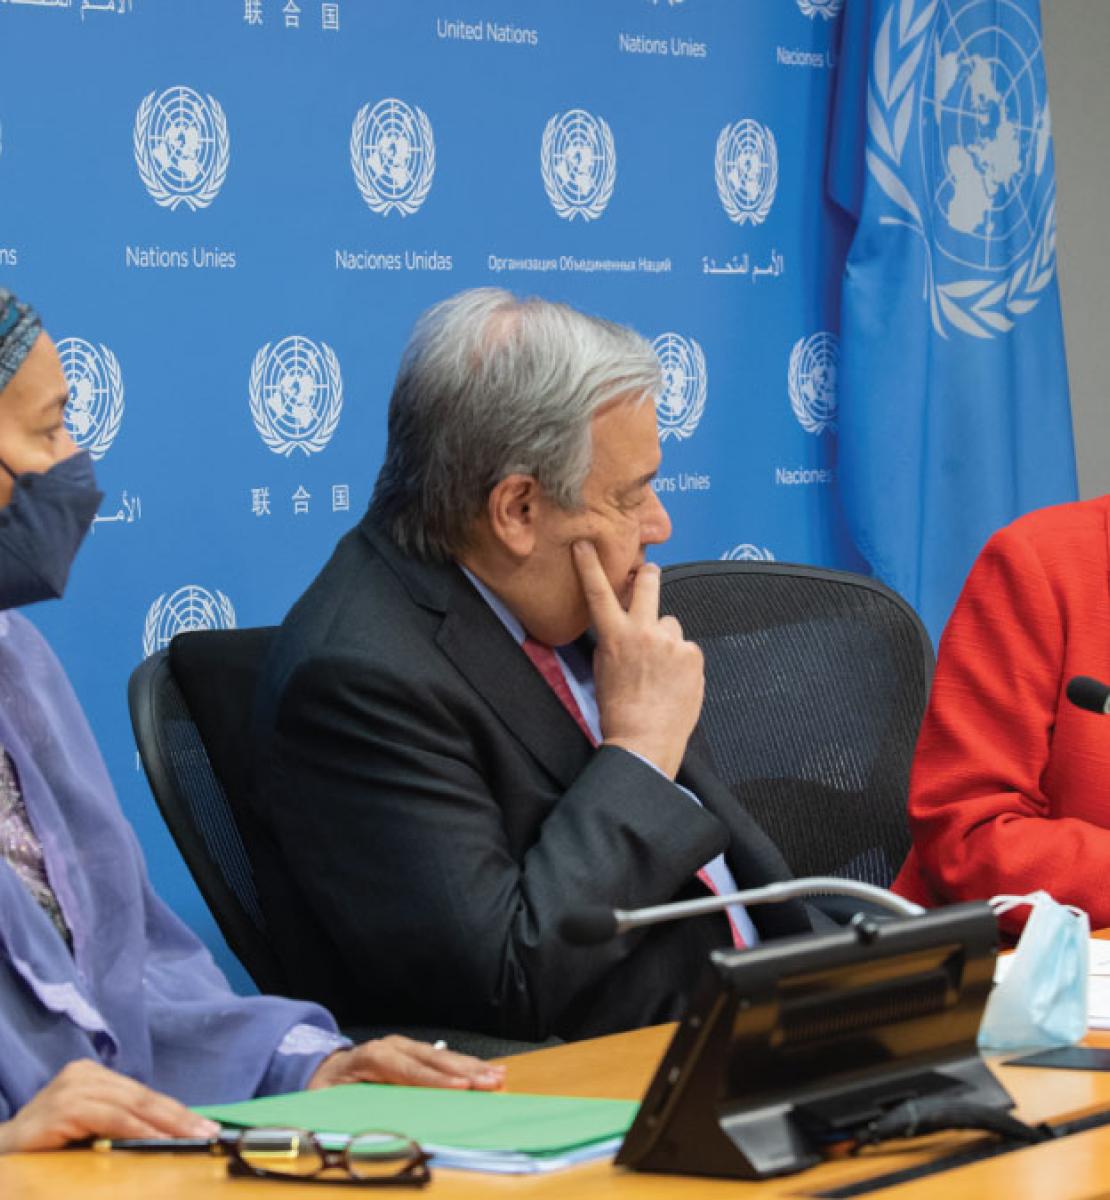 A man, the UN Secretary-General, sits between two women amid a lively discussion, with UN logos behind them.